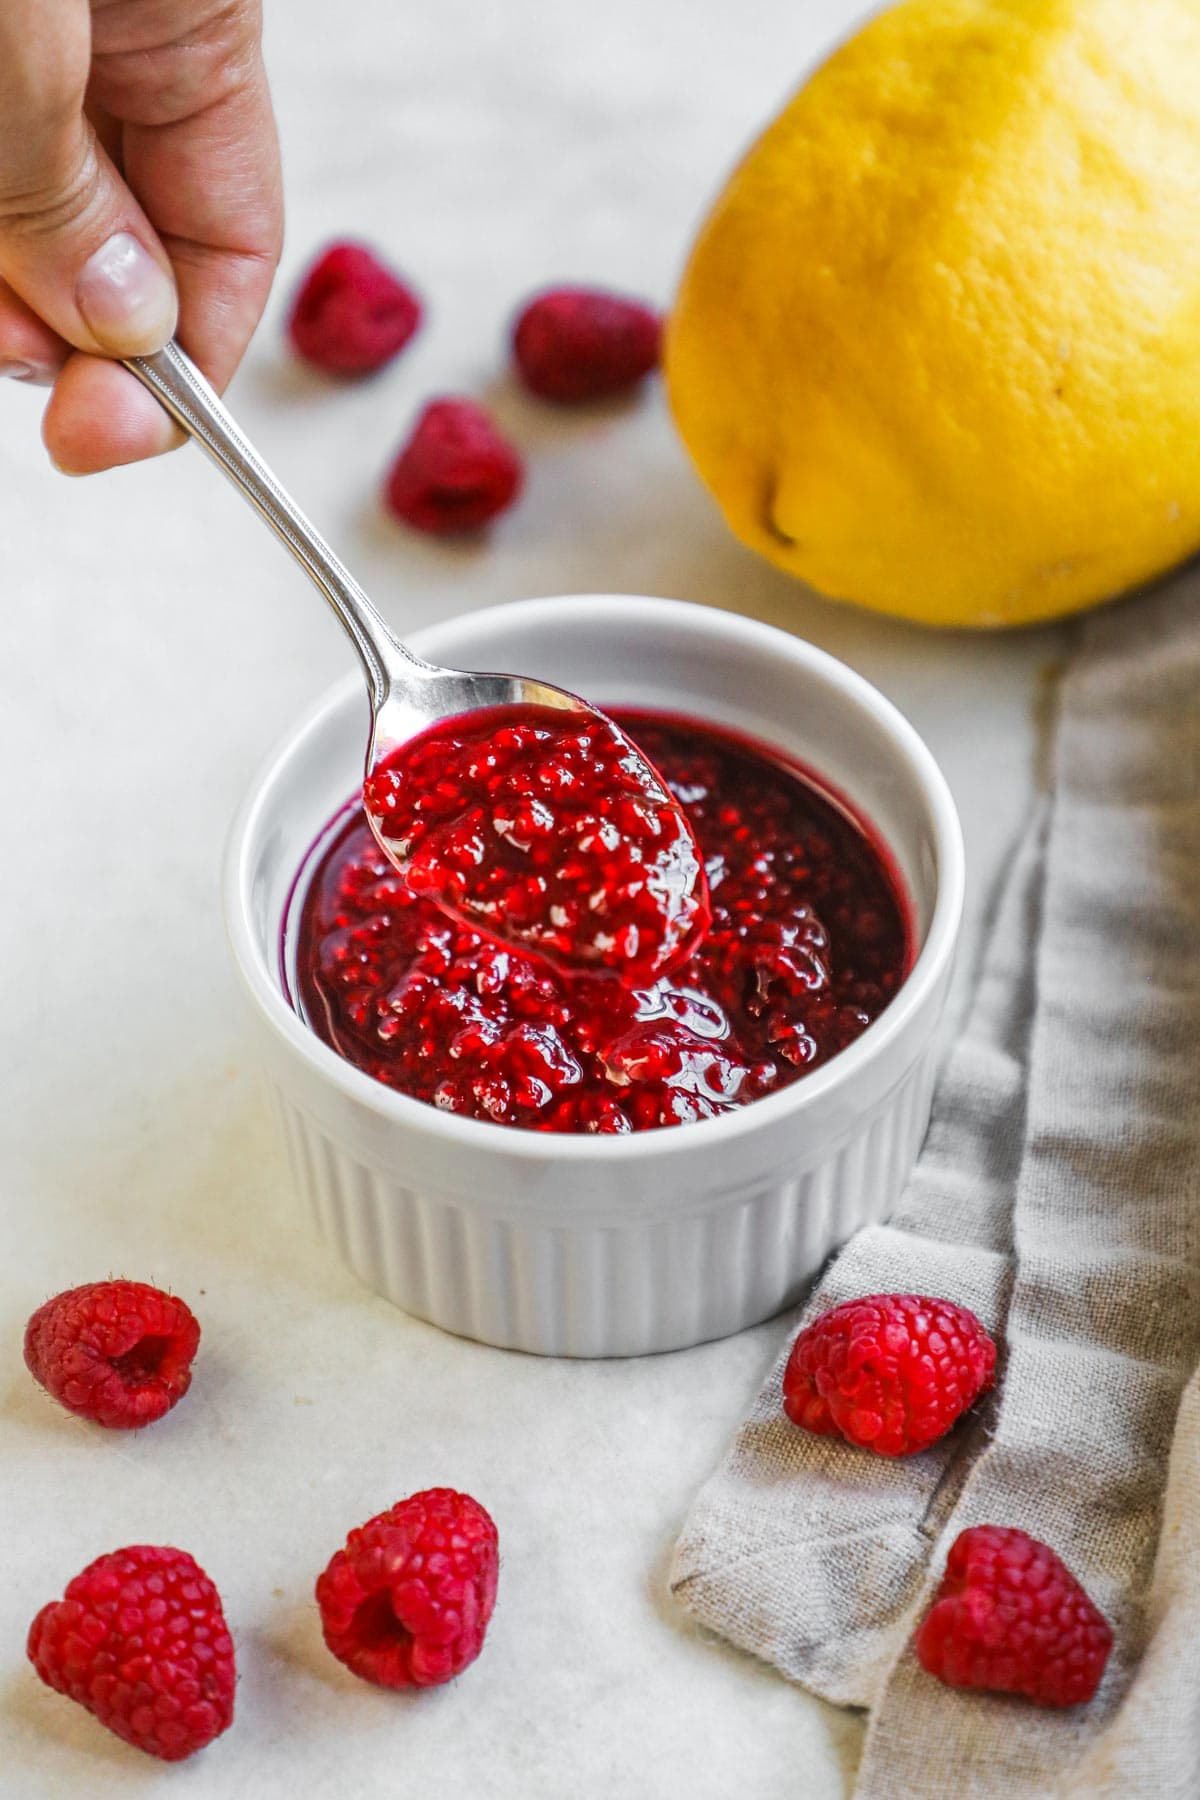 Spoon holding a scoop of handmade raspberry compote above a ramekin of compote for ice cream, cake, cheesecake, dessert, and more.